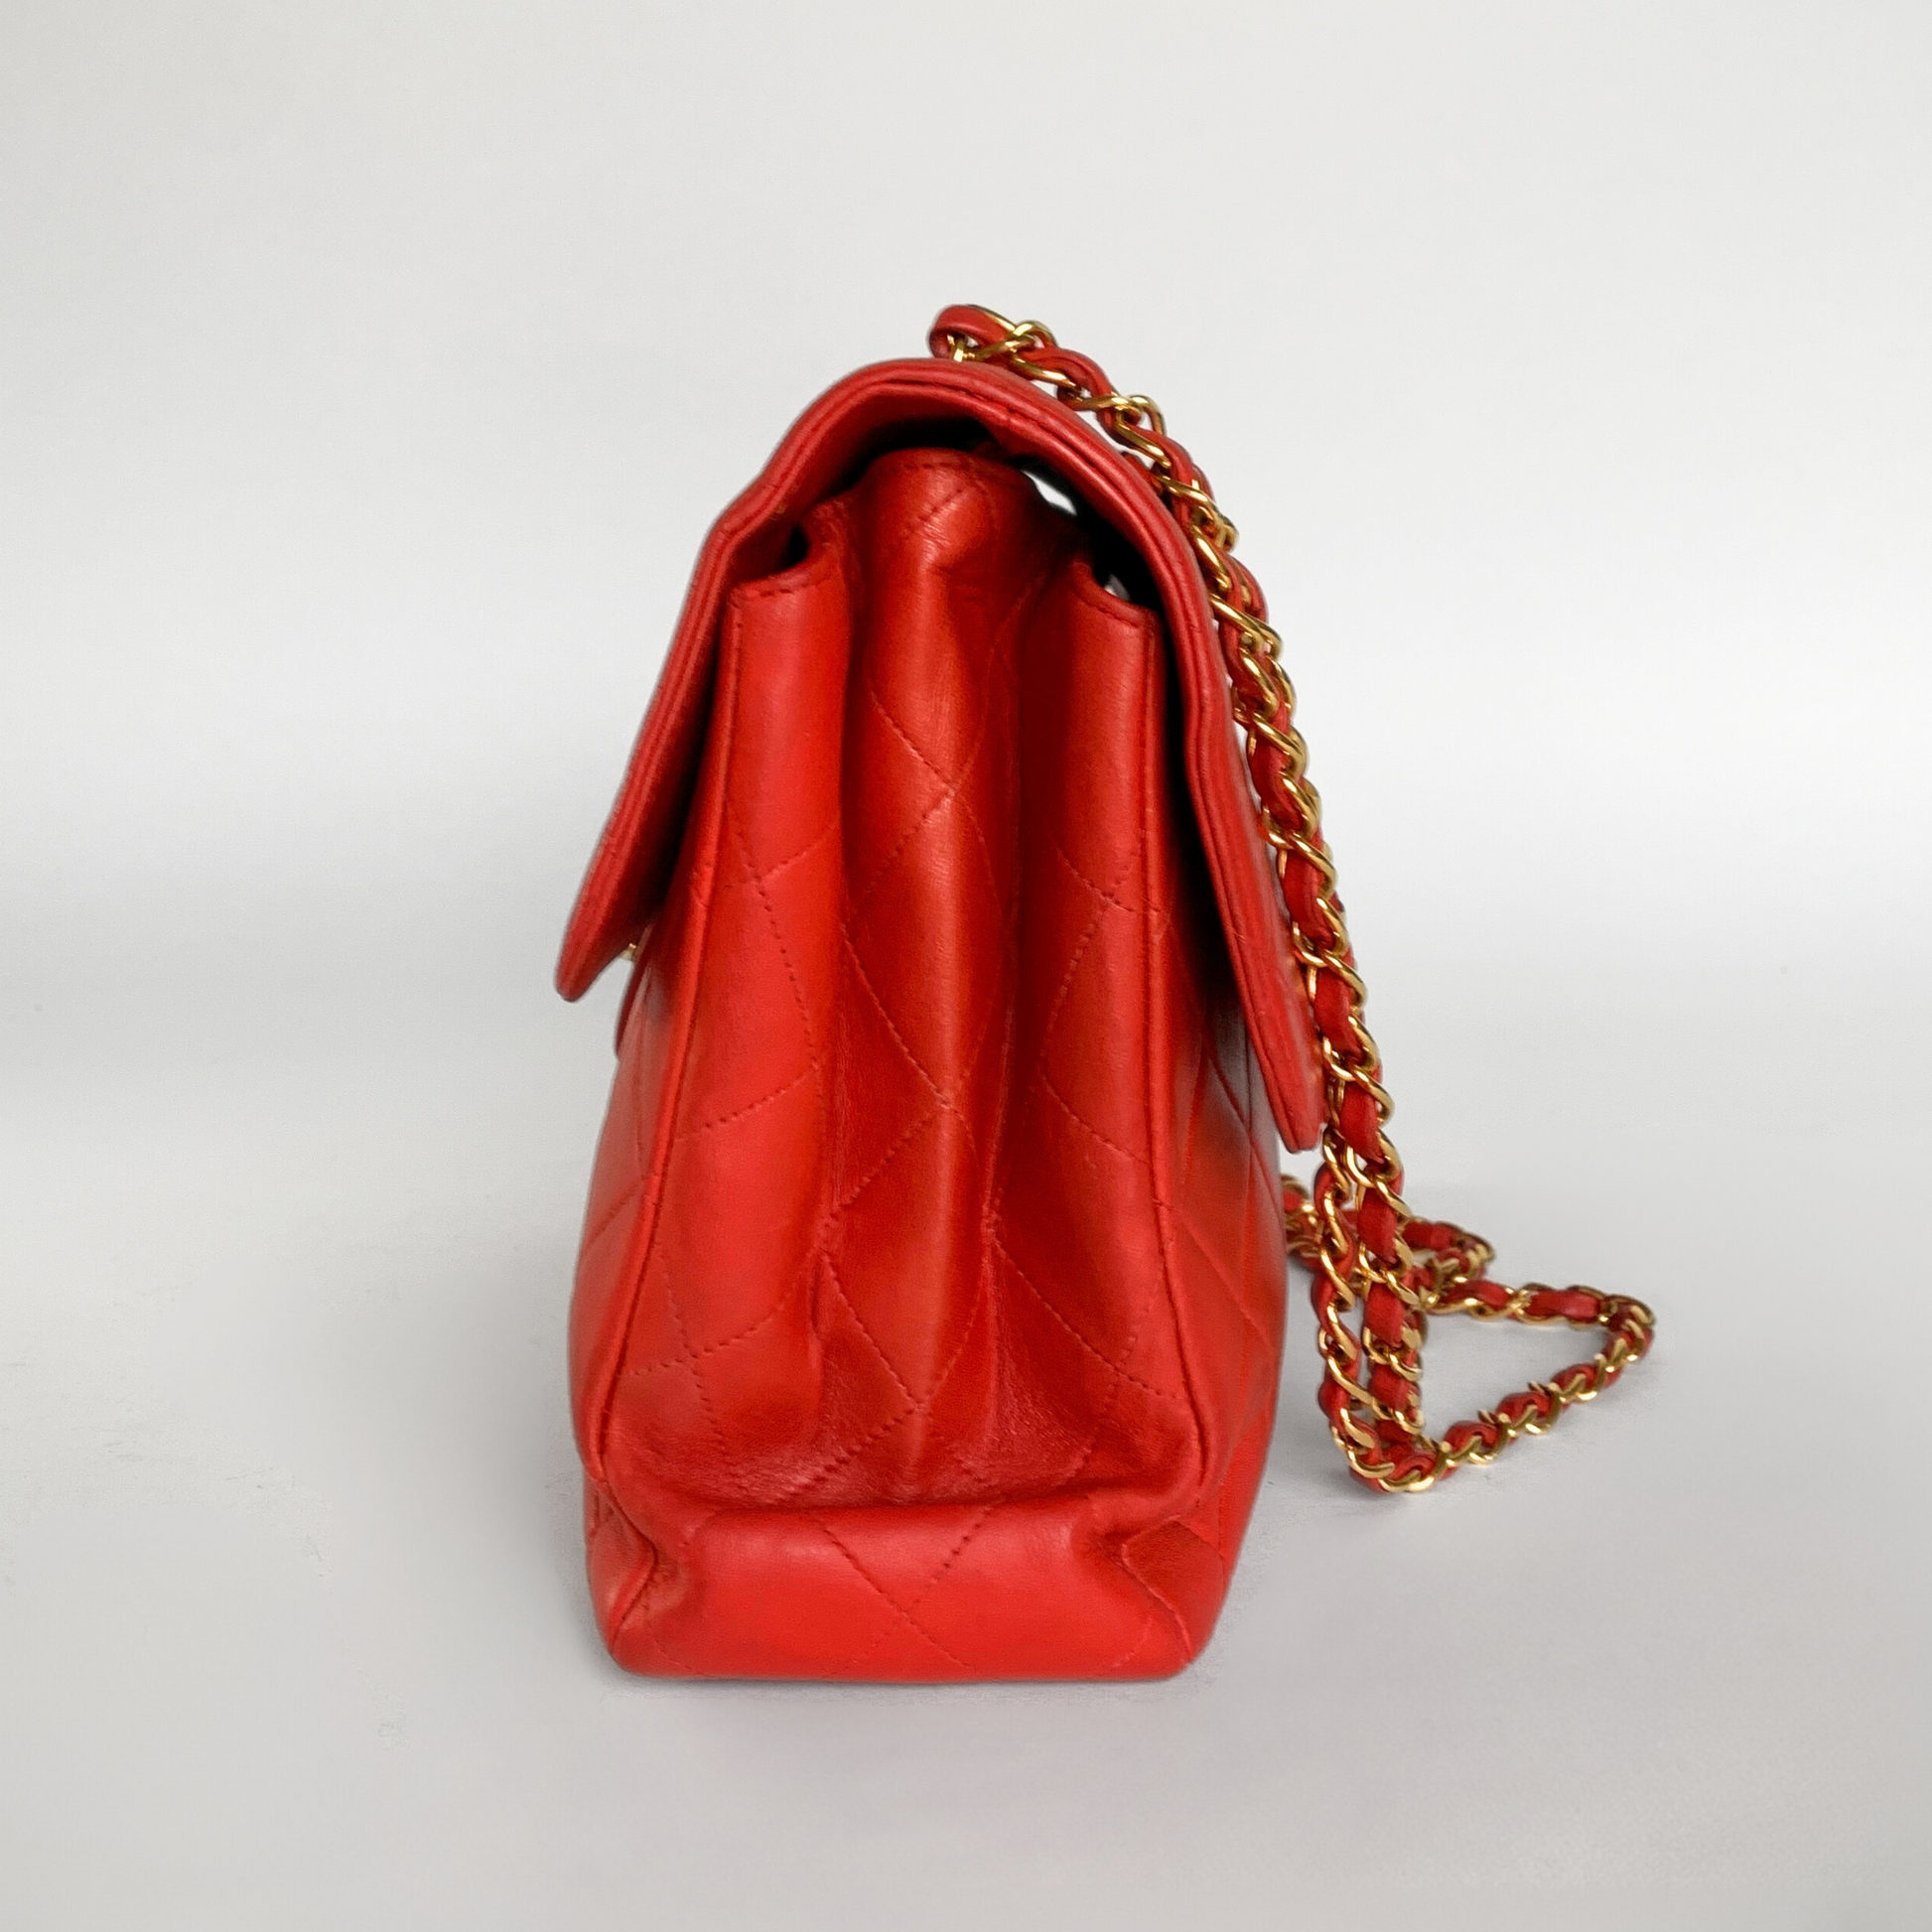 Chanel Bright Red 10 Double Flap Bag - Vintage Lux